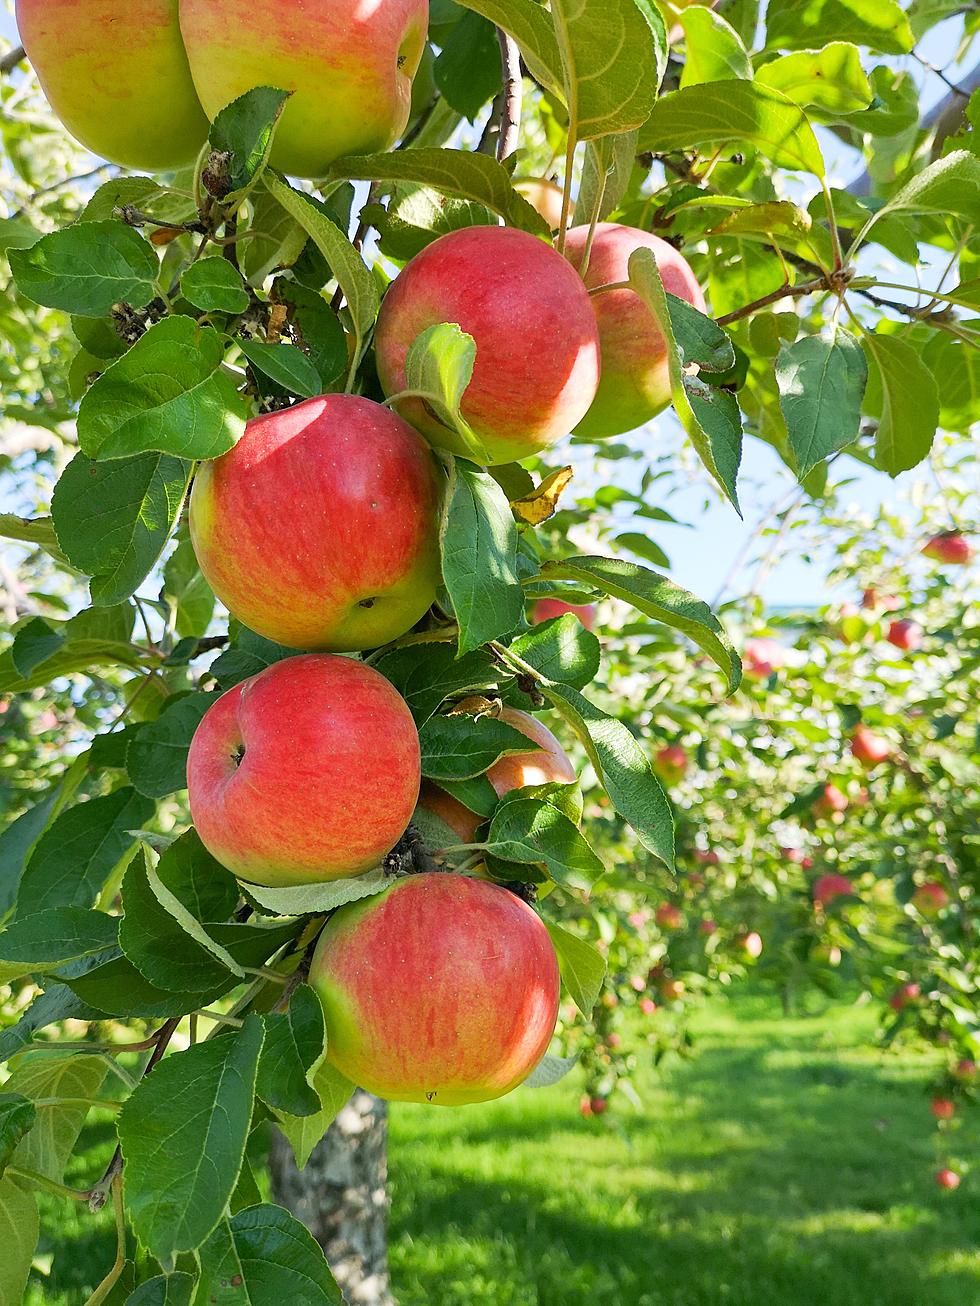 These 7 Southeast Minnesota Apple Orchards Are Worth A Visit!